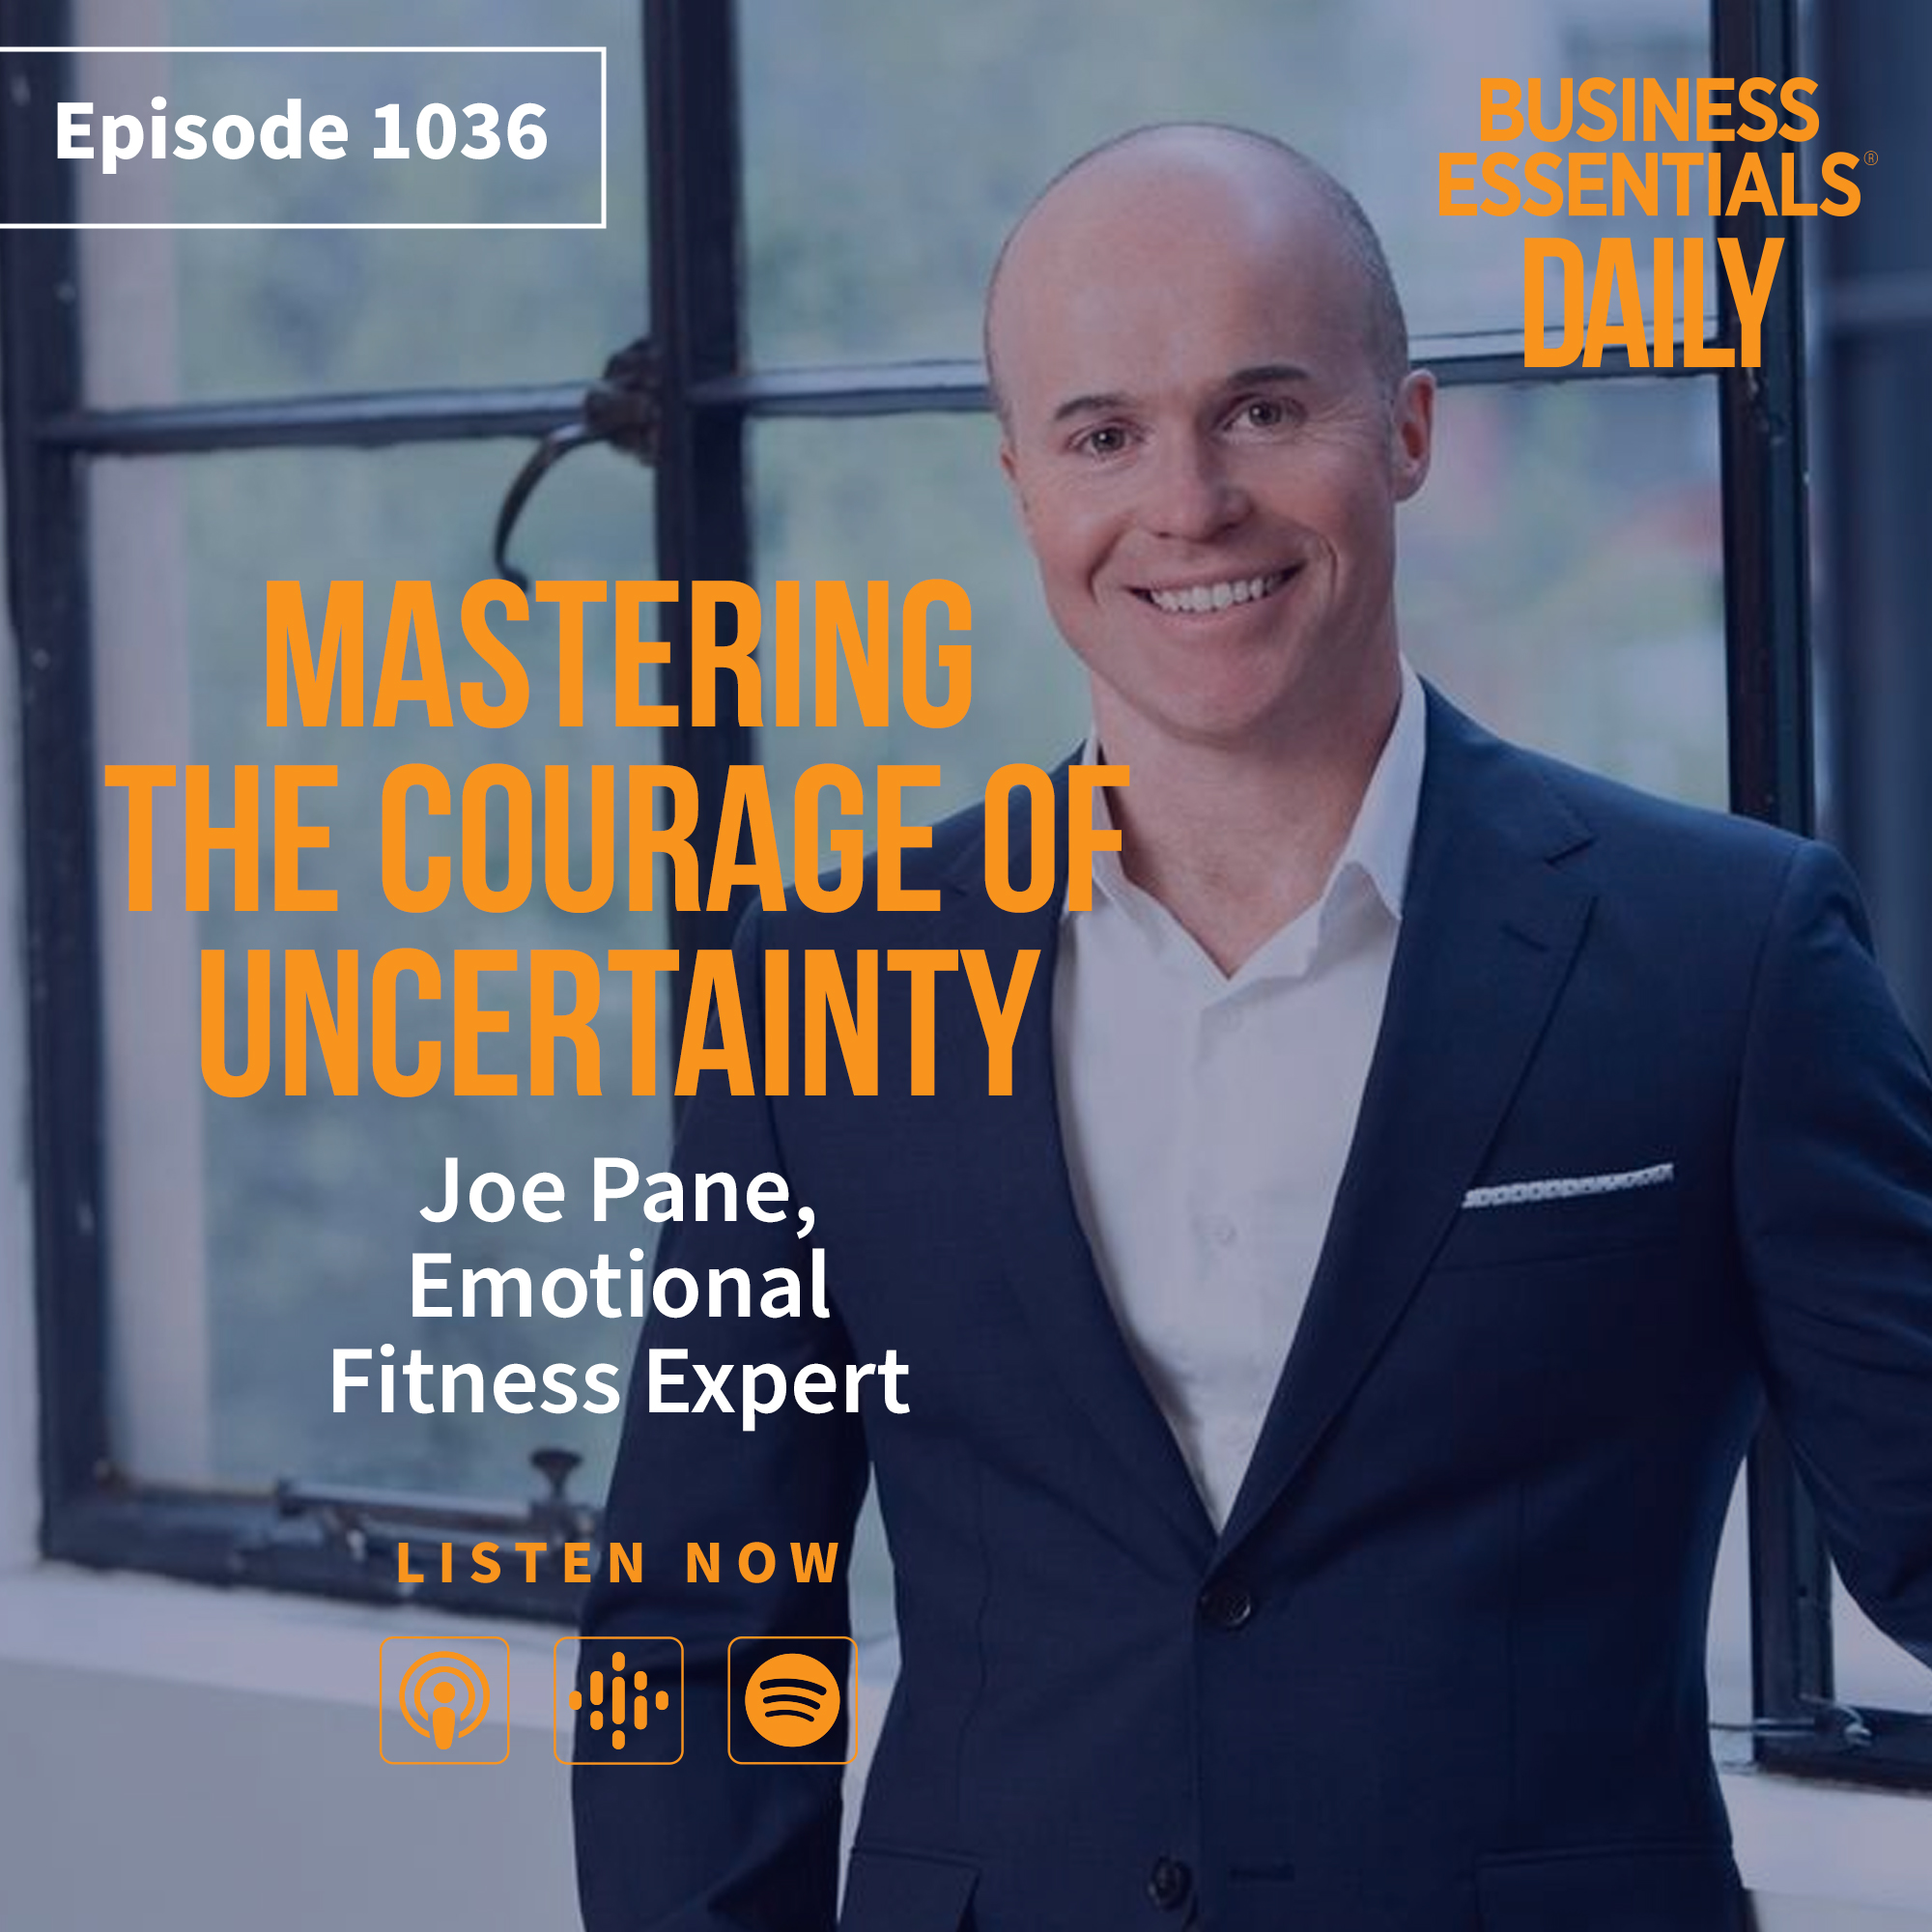 Mastering the courage of uncertainty